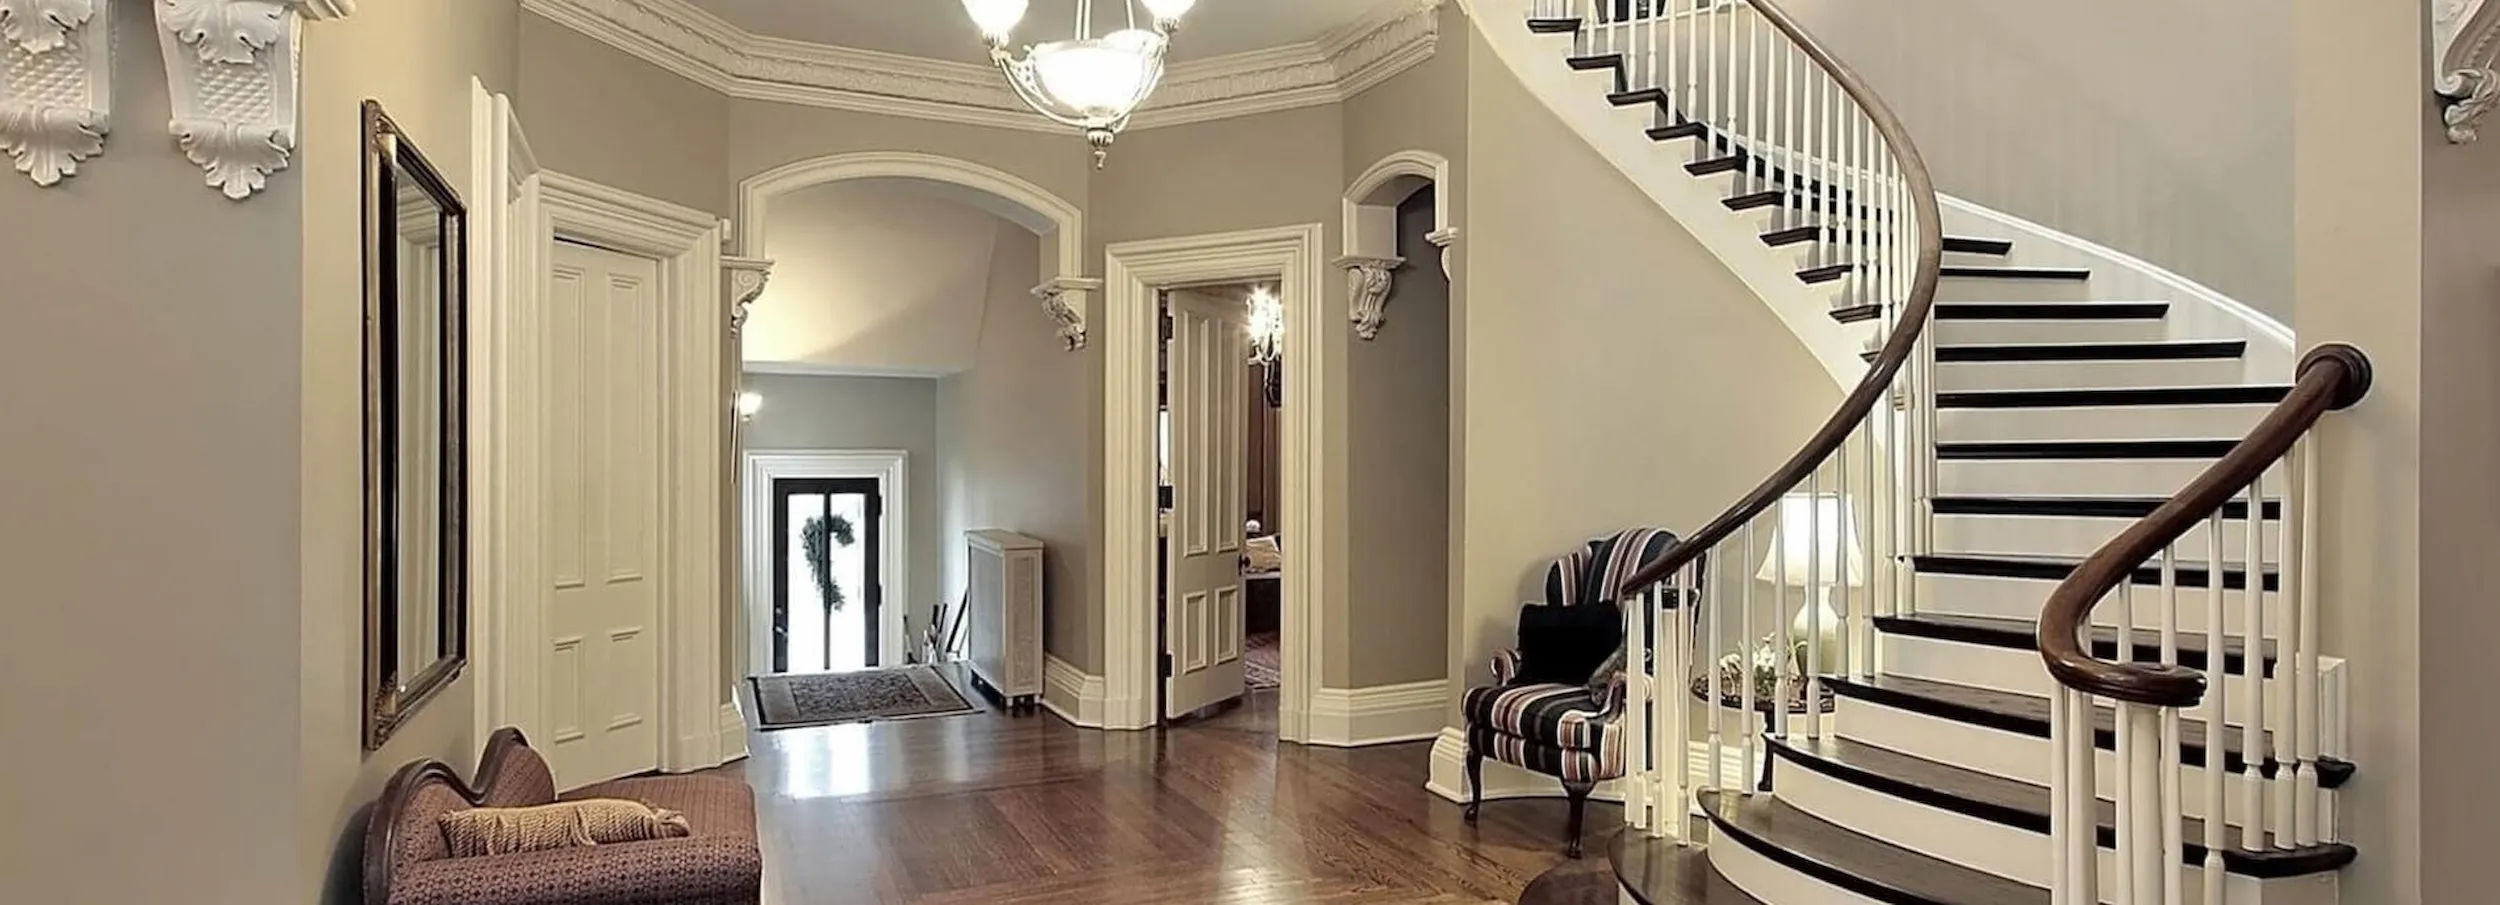 White and wood grand staircase at entryway of upscale home